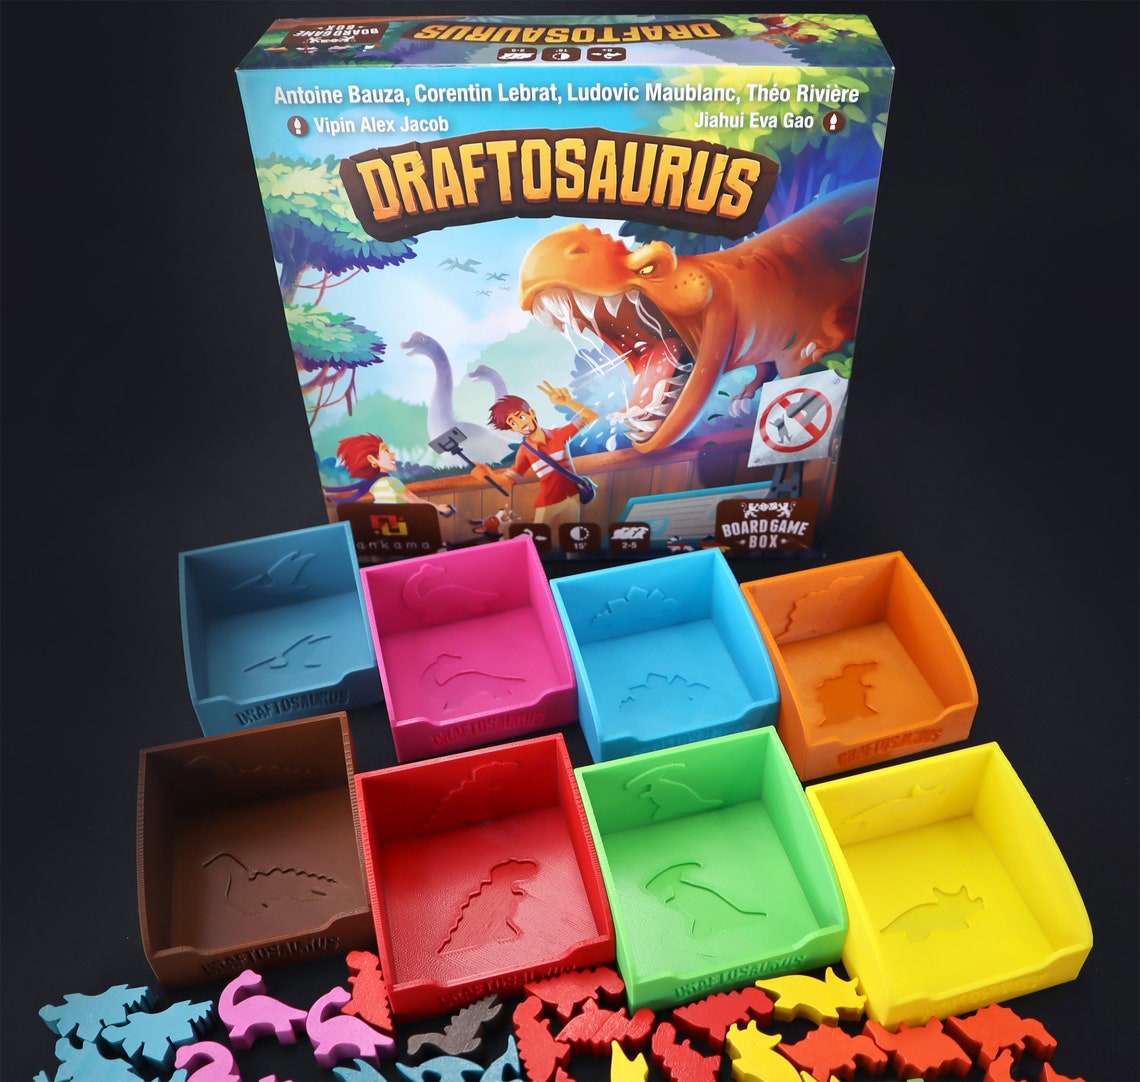 3D Printed Containers for Draftosaurus (8 pcs)